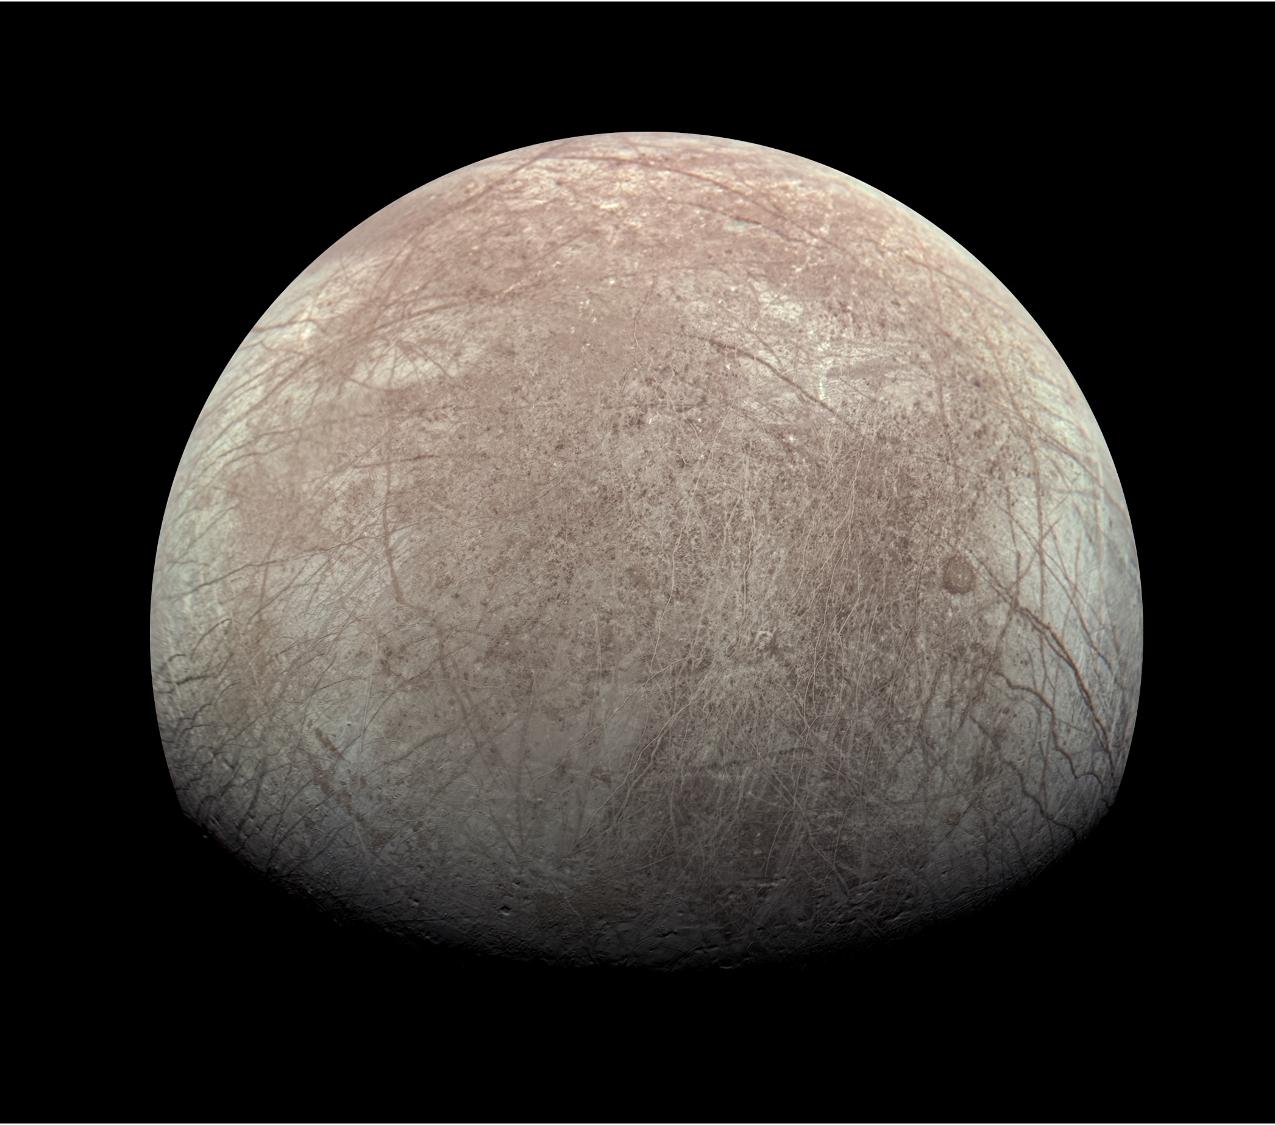 Europa has reddish brown lines and patches in this image from Juno.